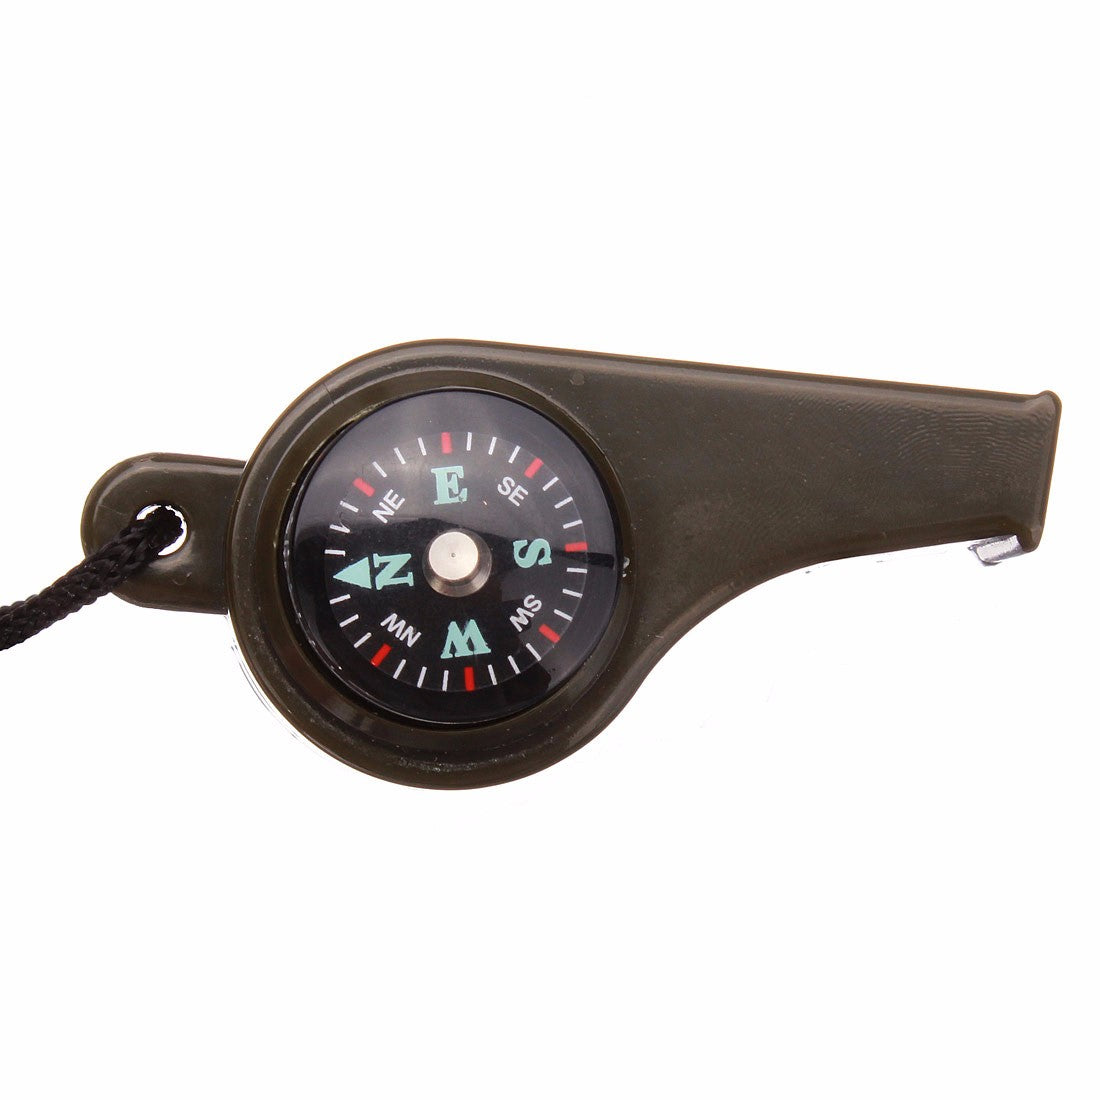 Outdoor Survival Tool Triad Whistle Compass Thermometer With Hang Rope